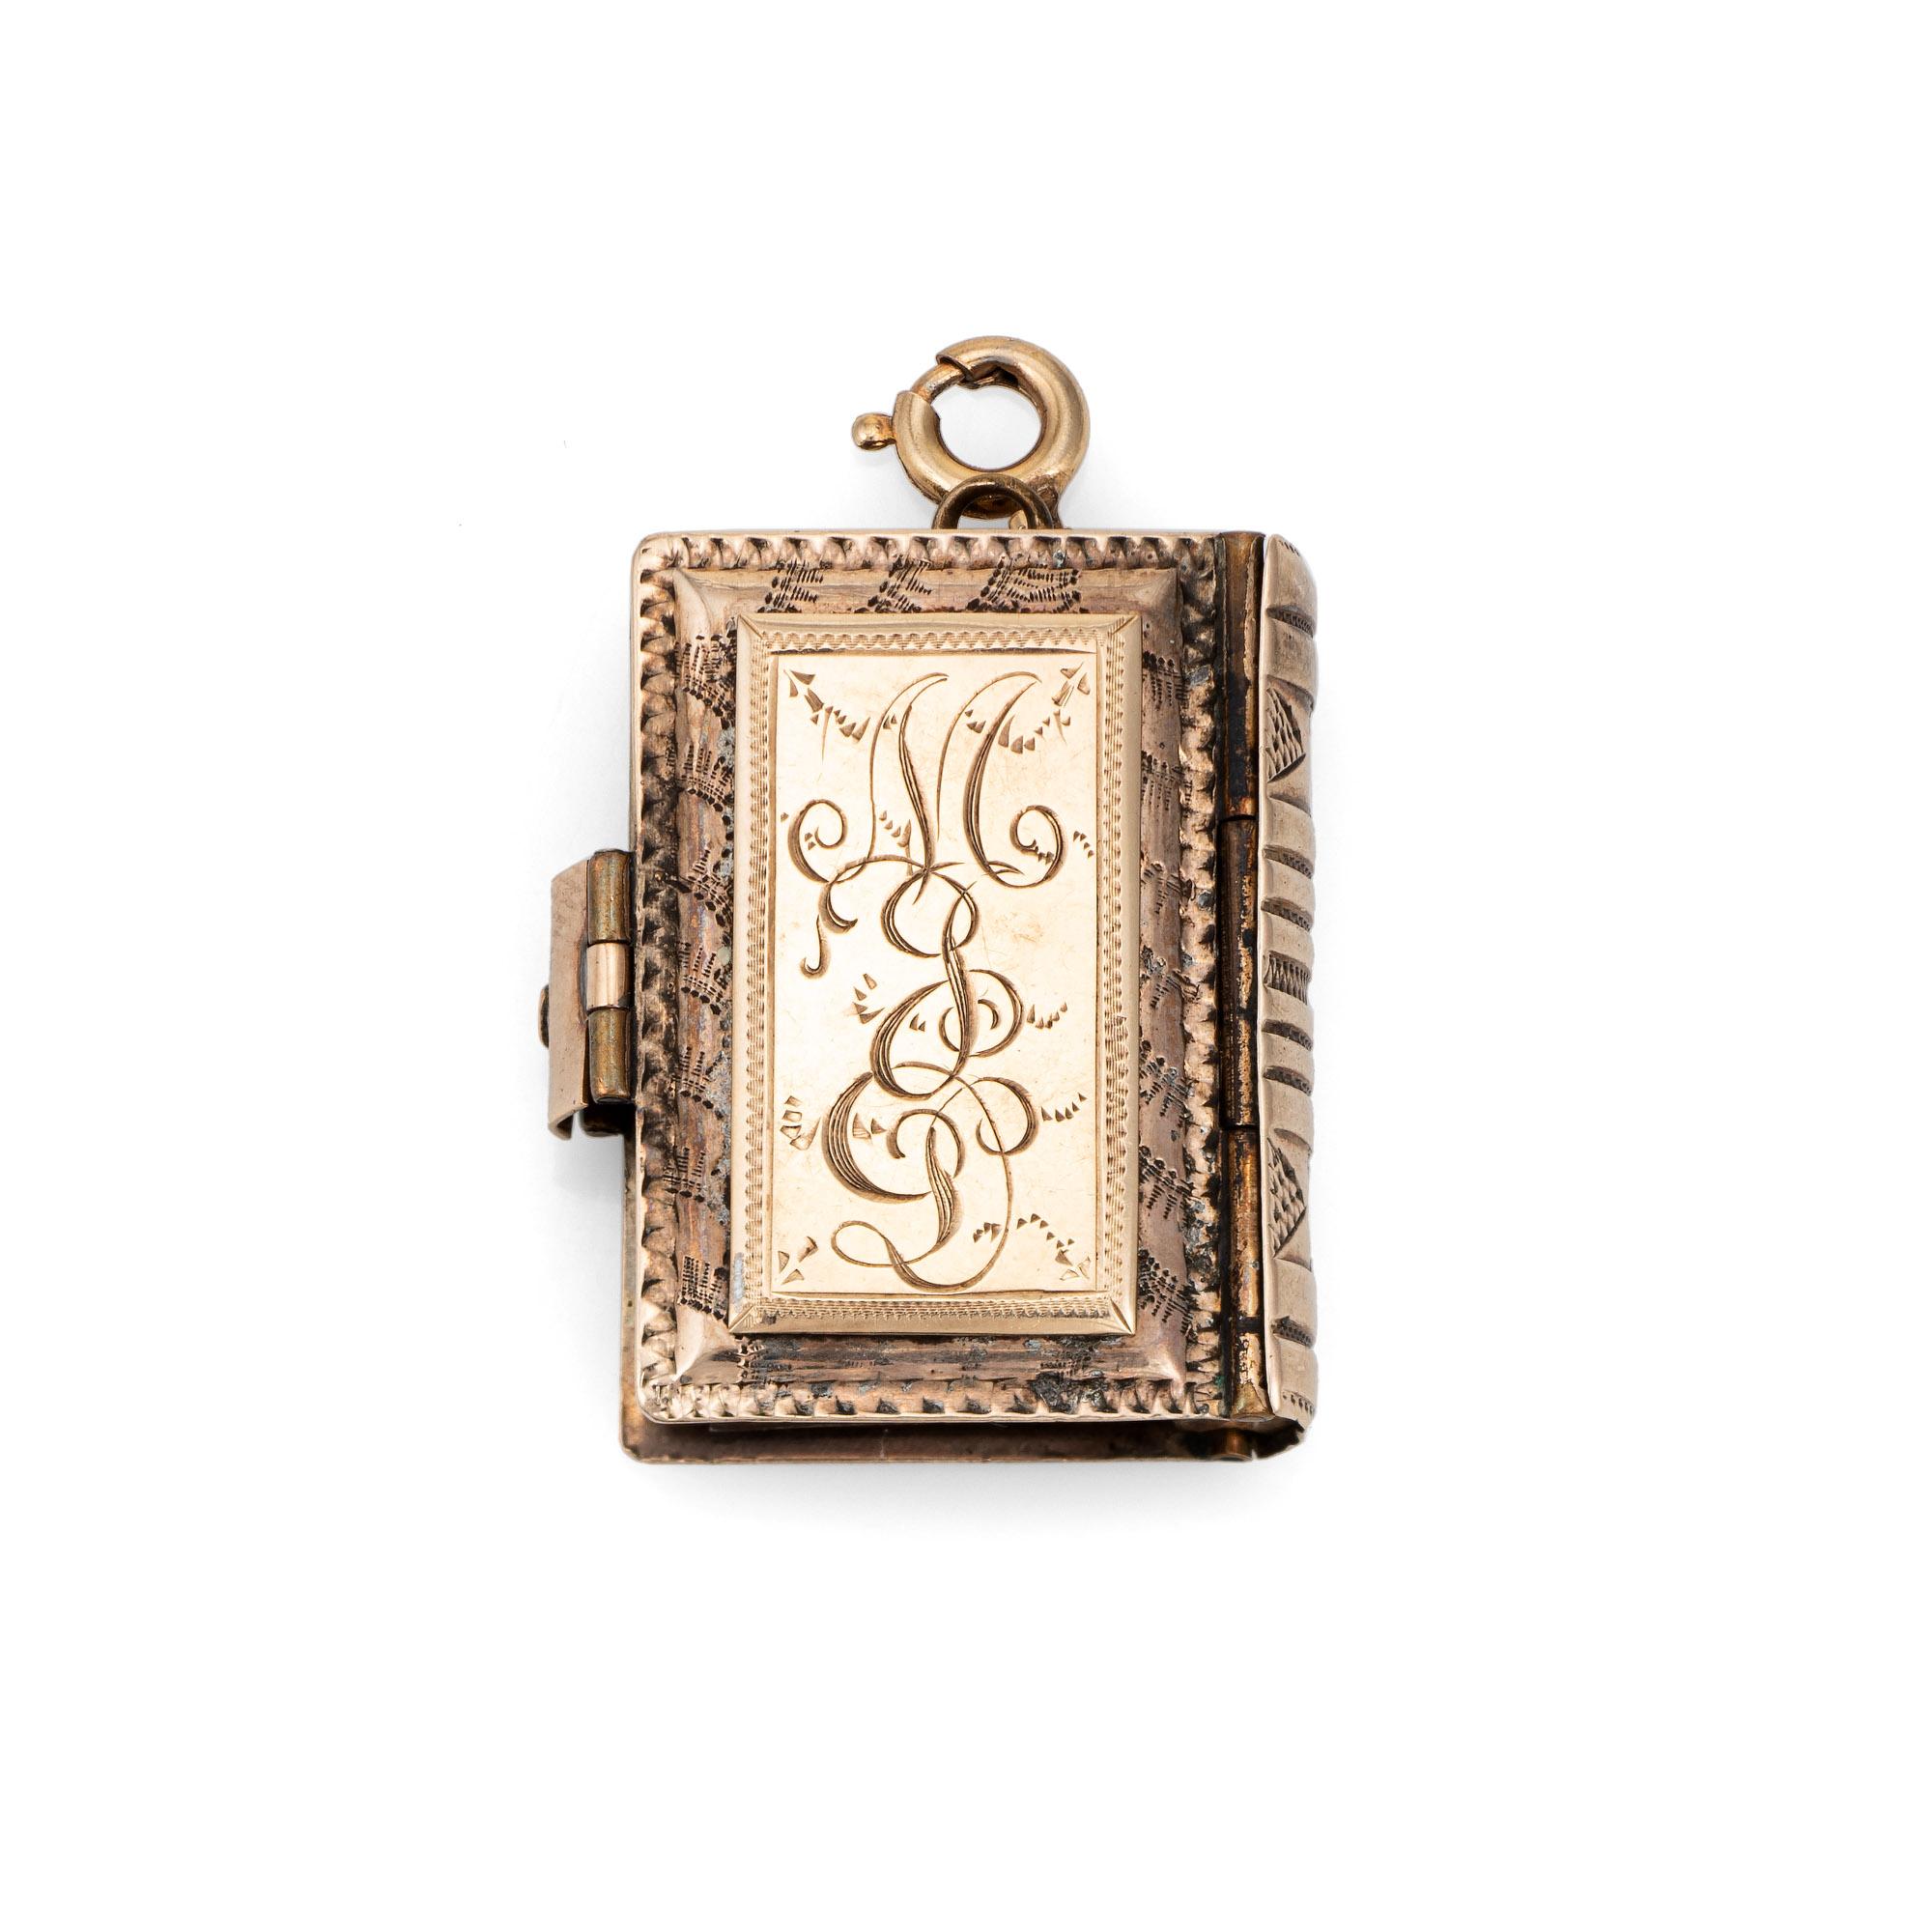 The beautifully detailed locket opens to reveal 7 hinged sepia toned original photos set within ornate frames (and 1 empty frame). The exterior of the locket features finely detailed decorative emblems, chased on both sides. The inside of the charm